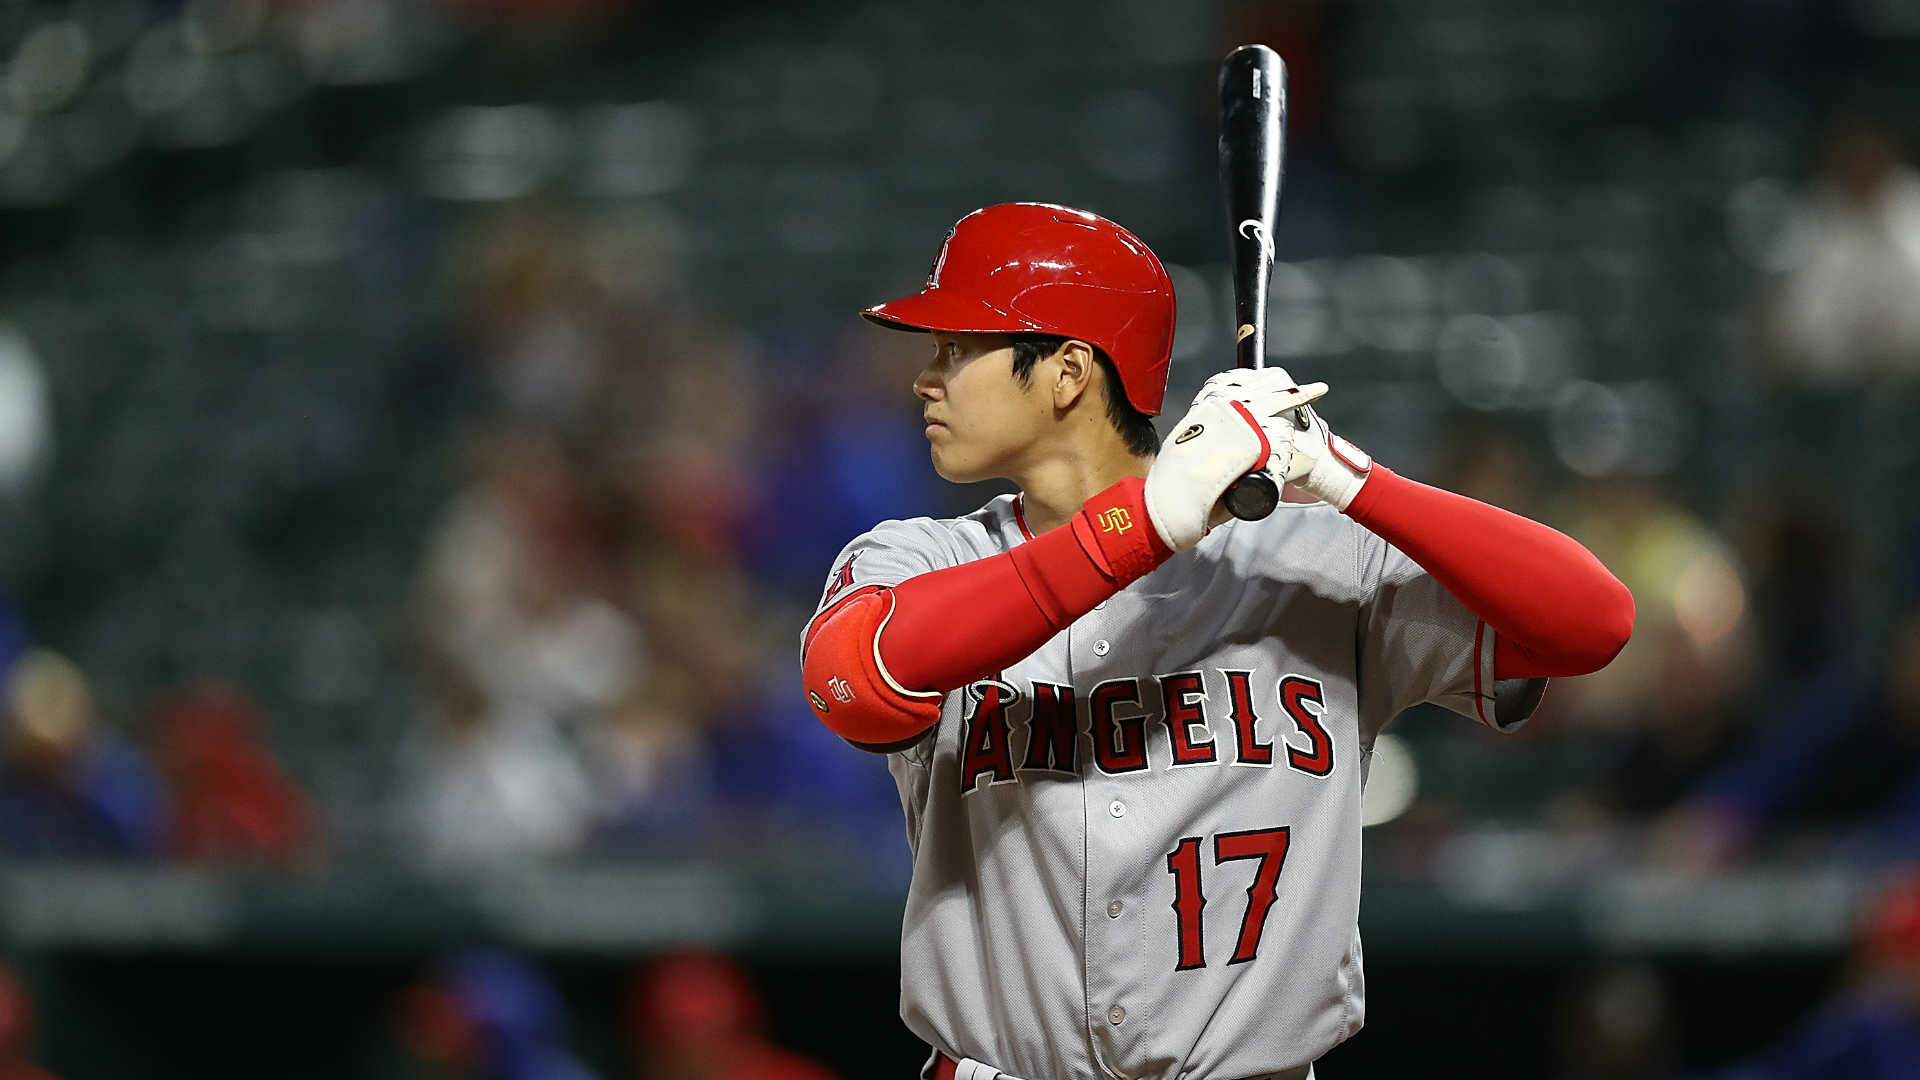 Shohei Ohtani: L.A. Angels, The first Japanese player to win the Best Major League Baseball Player ESPY Award. 1920x1080 Full HD Background.